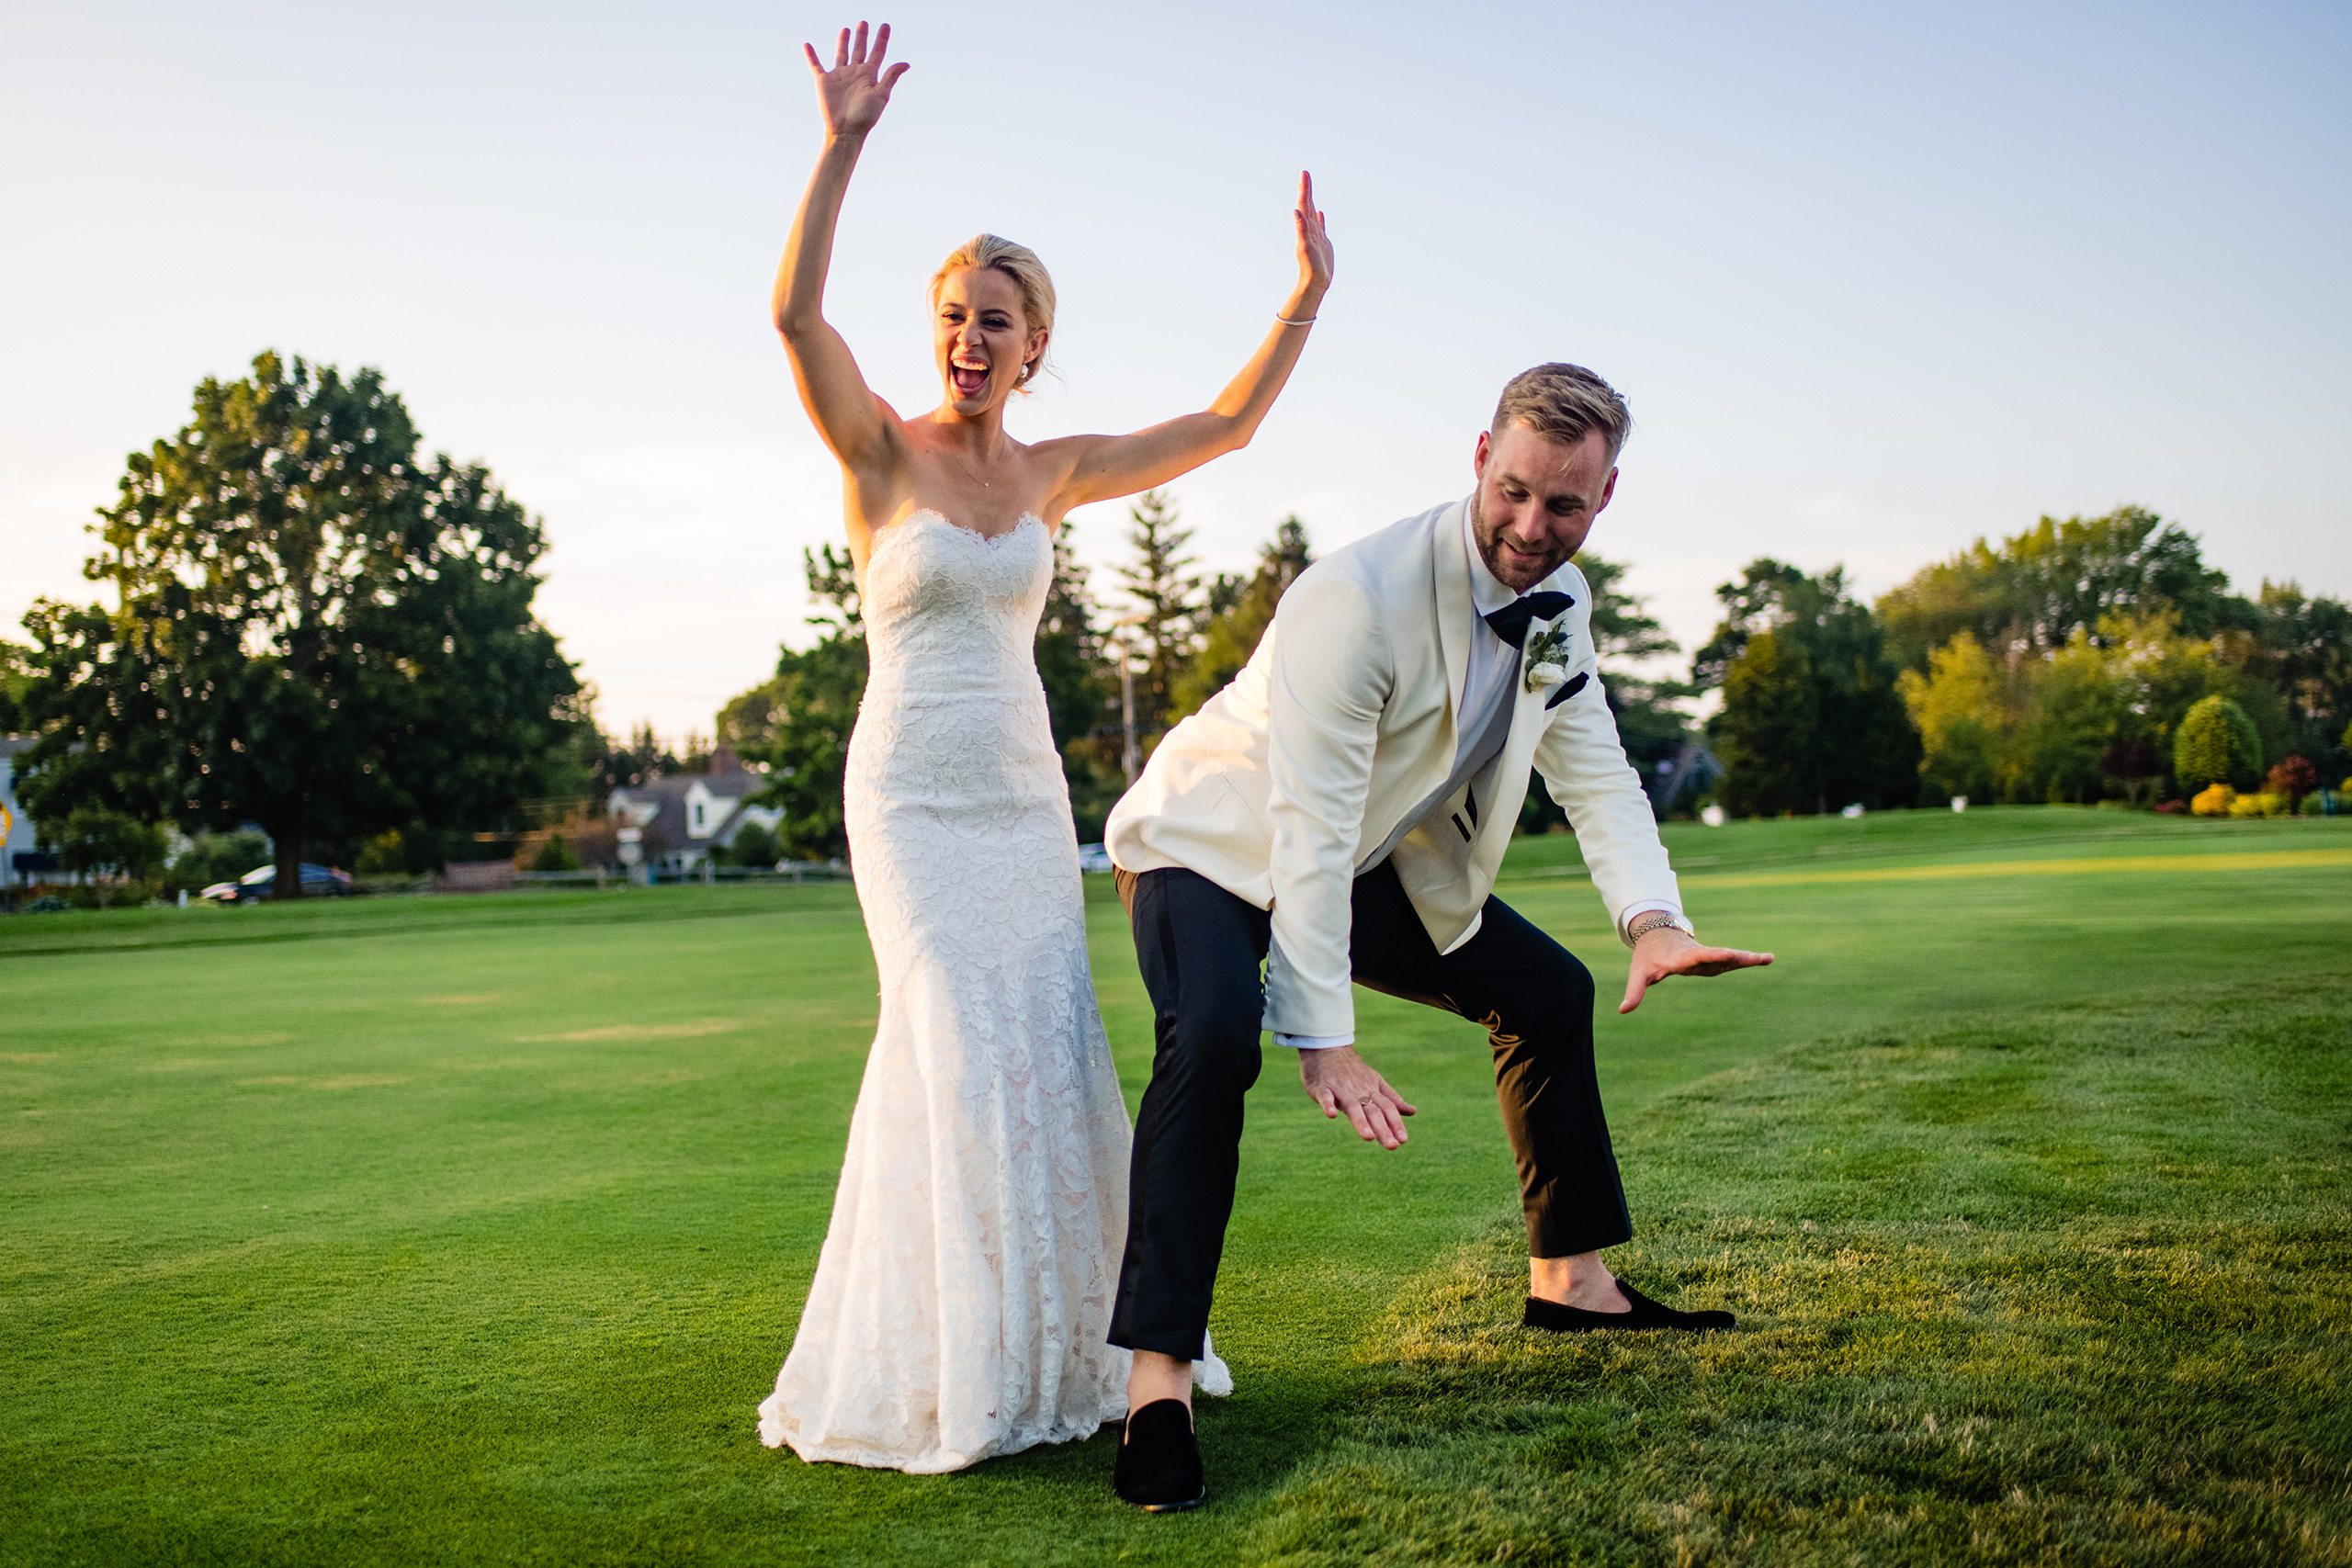 Bride and groom funny photo outdoors